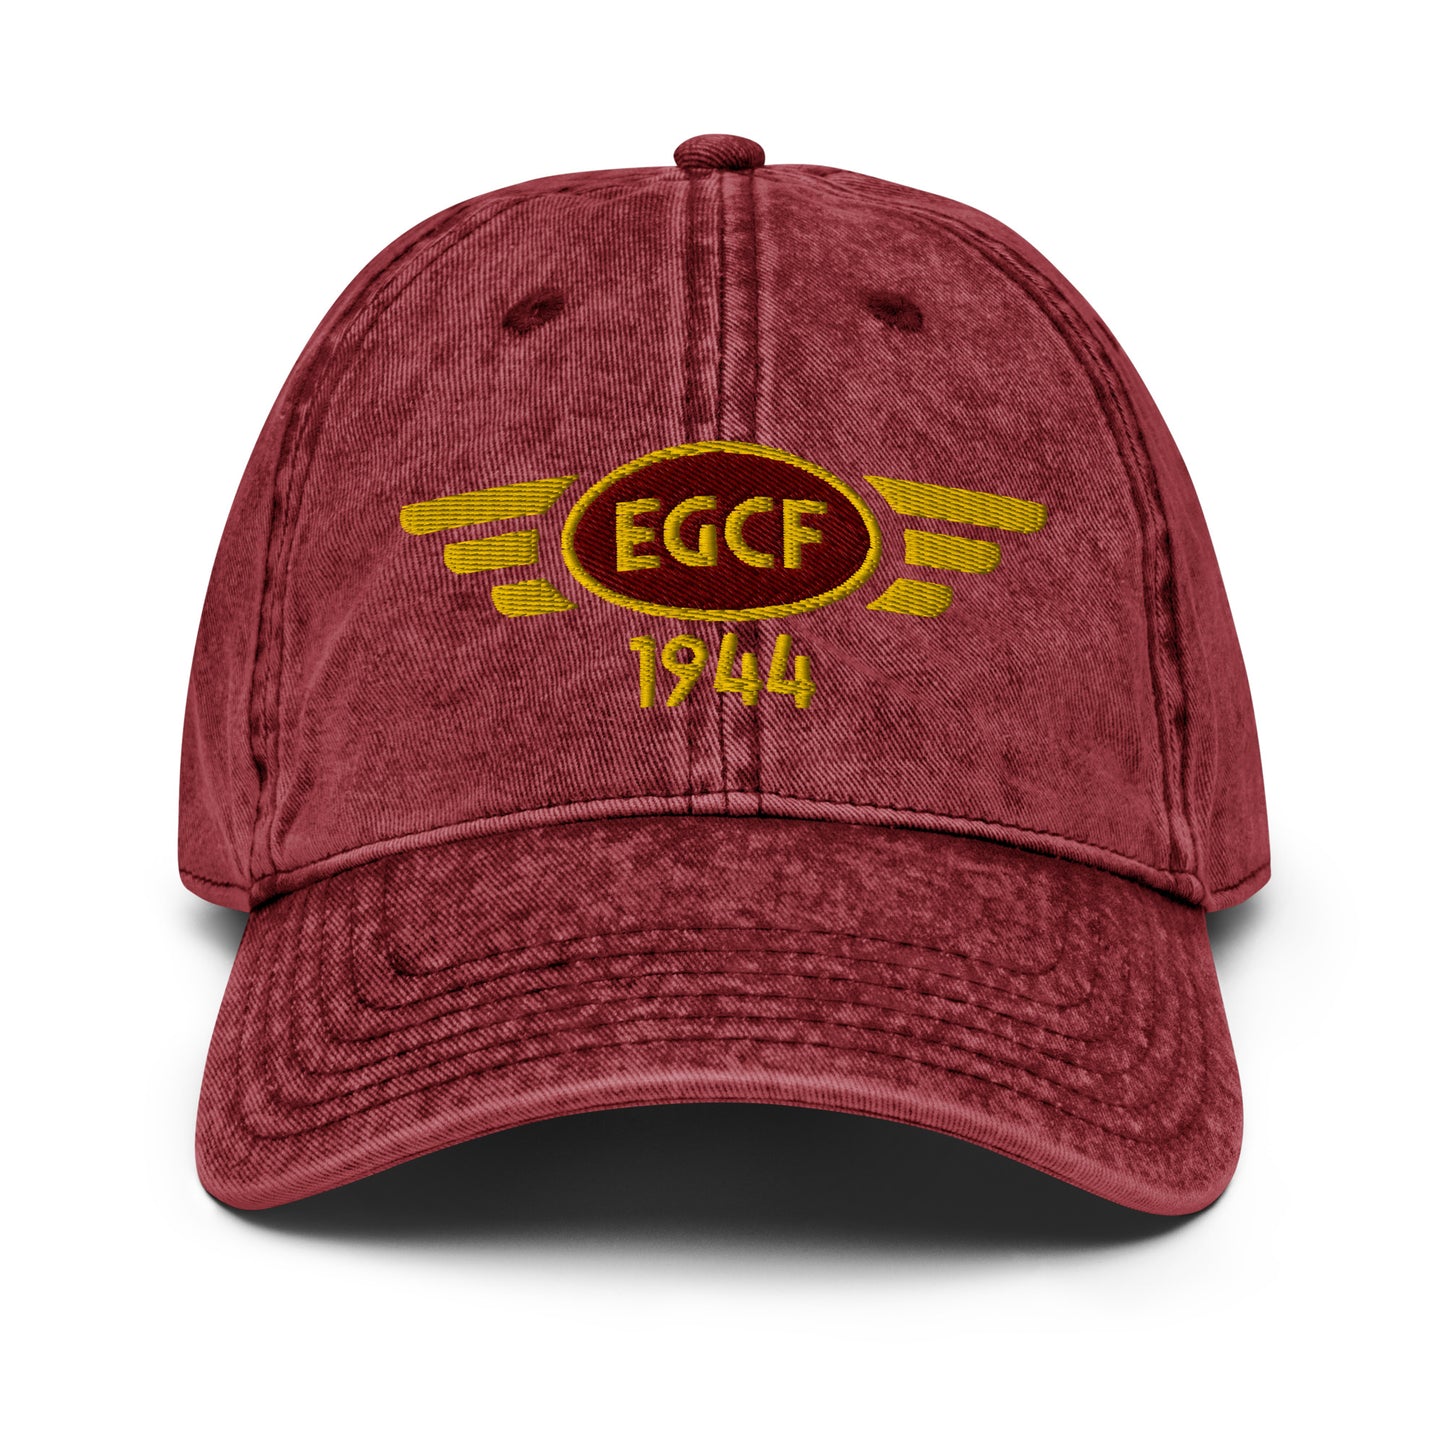 Burgundy coloured cotton twill baseball cap with embroidered vintage style aviation logo for Sandtoft Airfield.